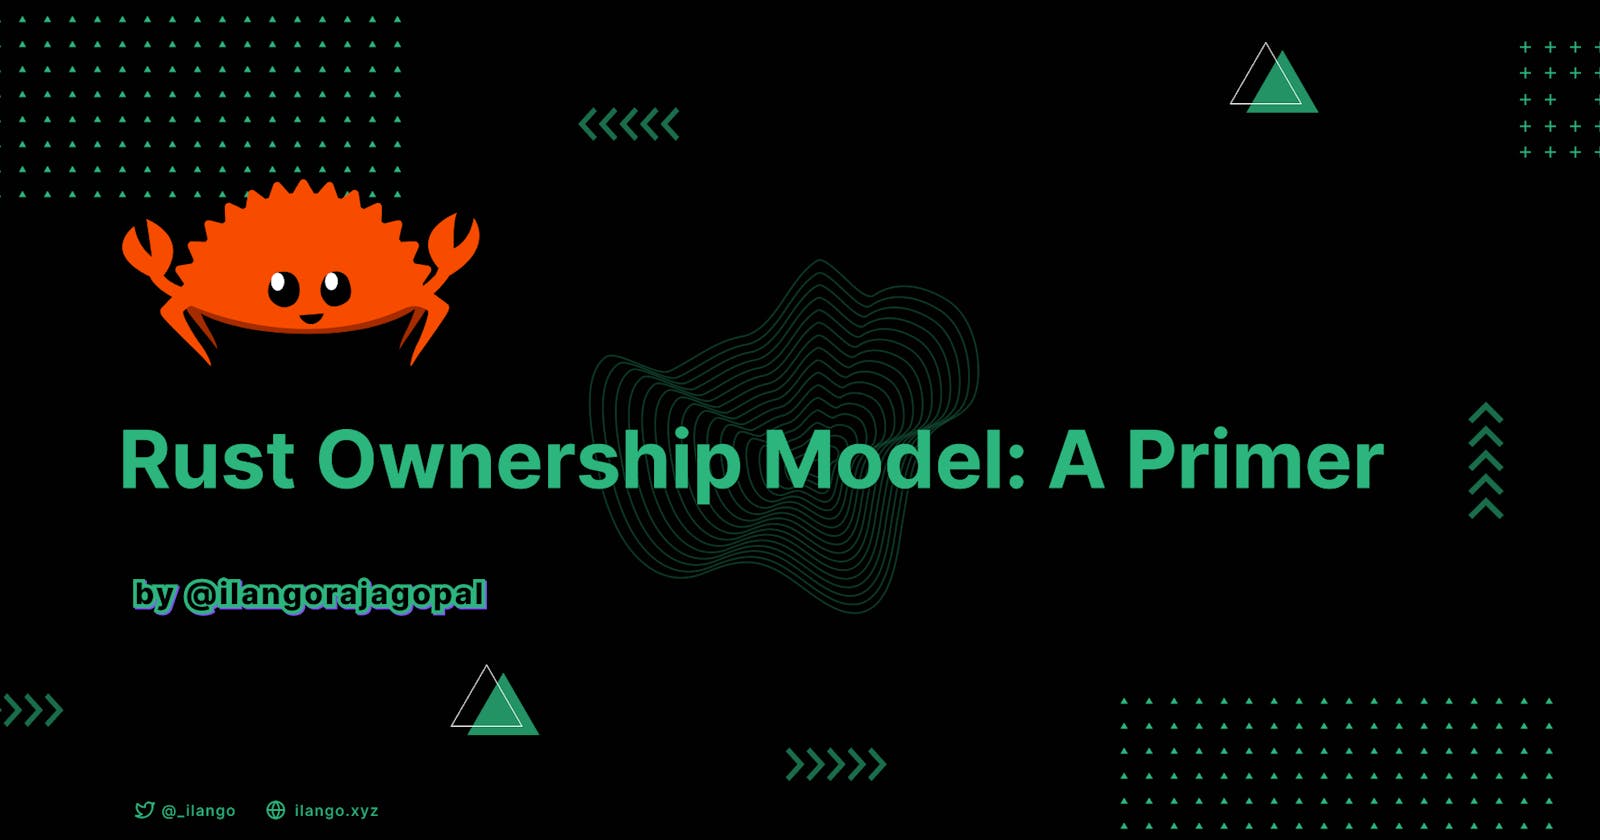 Rust Ownership Model: A Primer